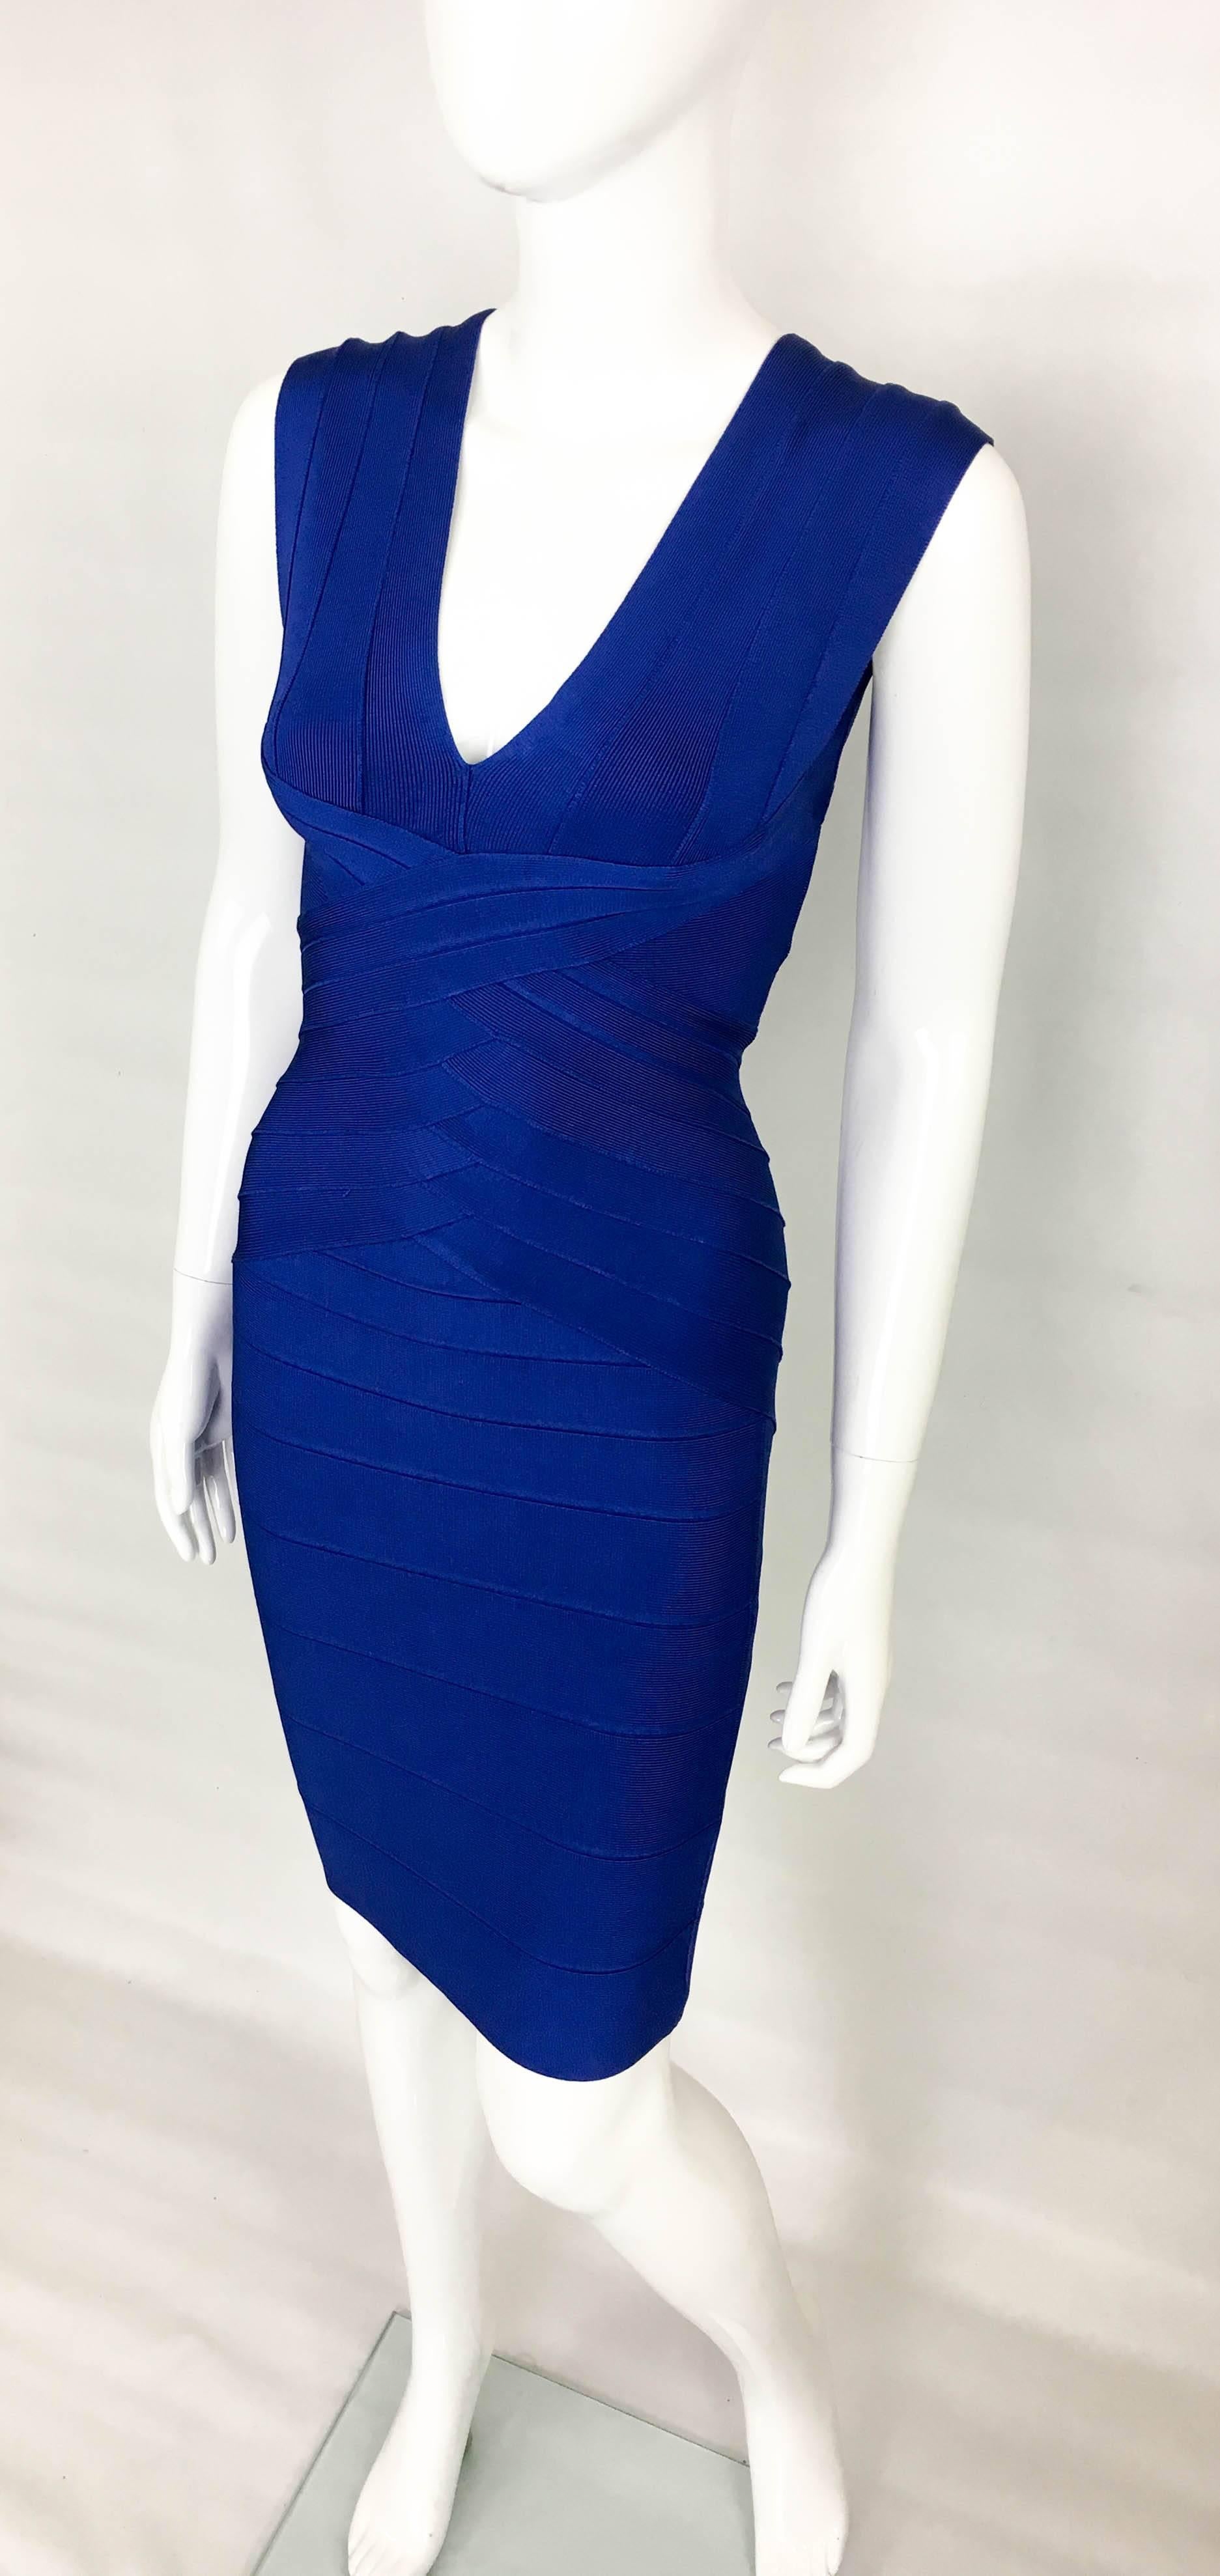 2010's Herve Leger Royal Blue Bodycon Bandage Dress In Excellent Condition In London, Chelsea